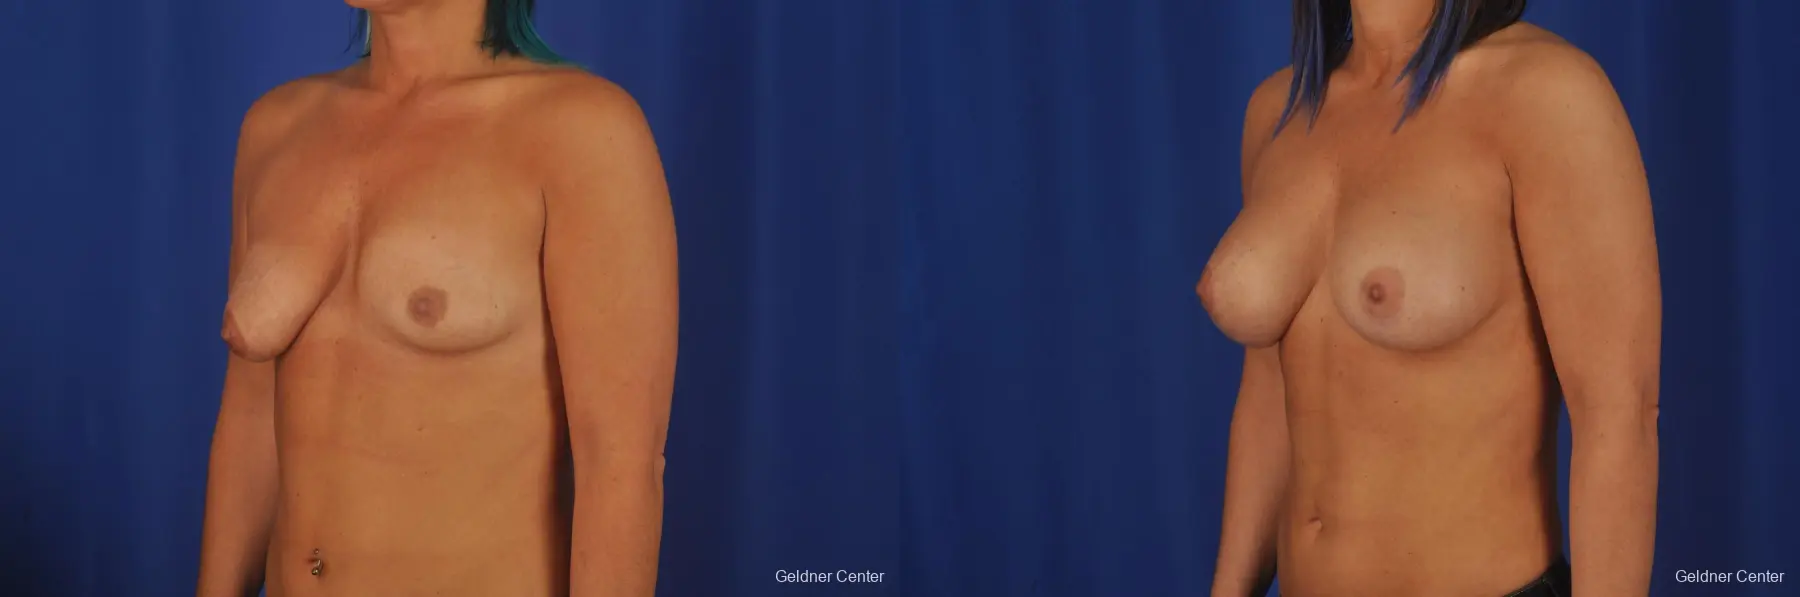 Breast Lift Lake Shore Dr, Chicago 2337 - Before and After 5